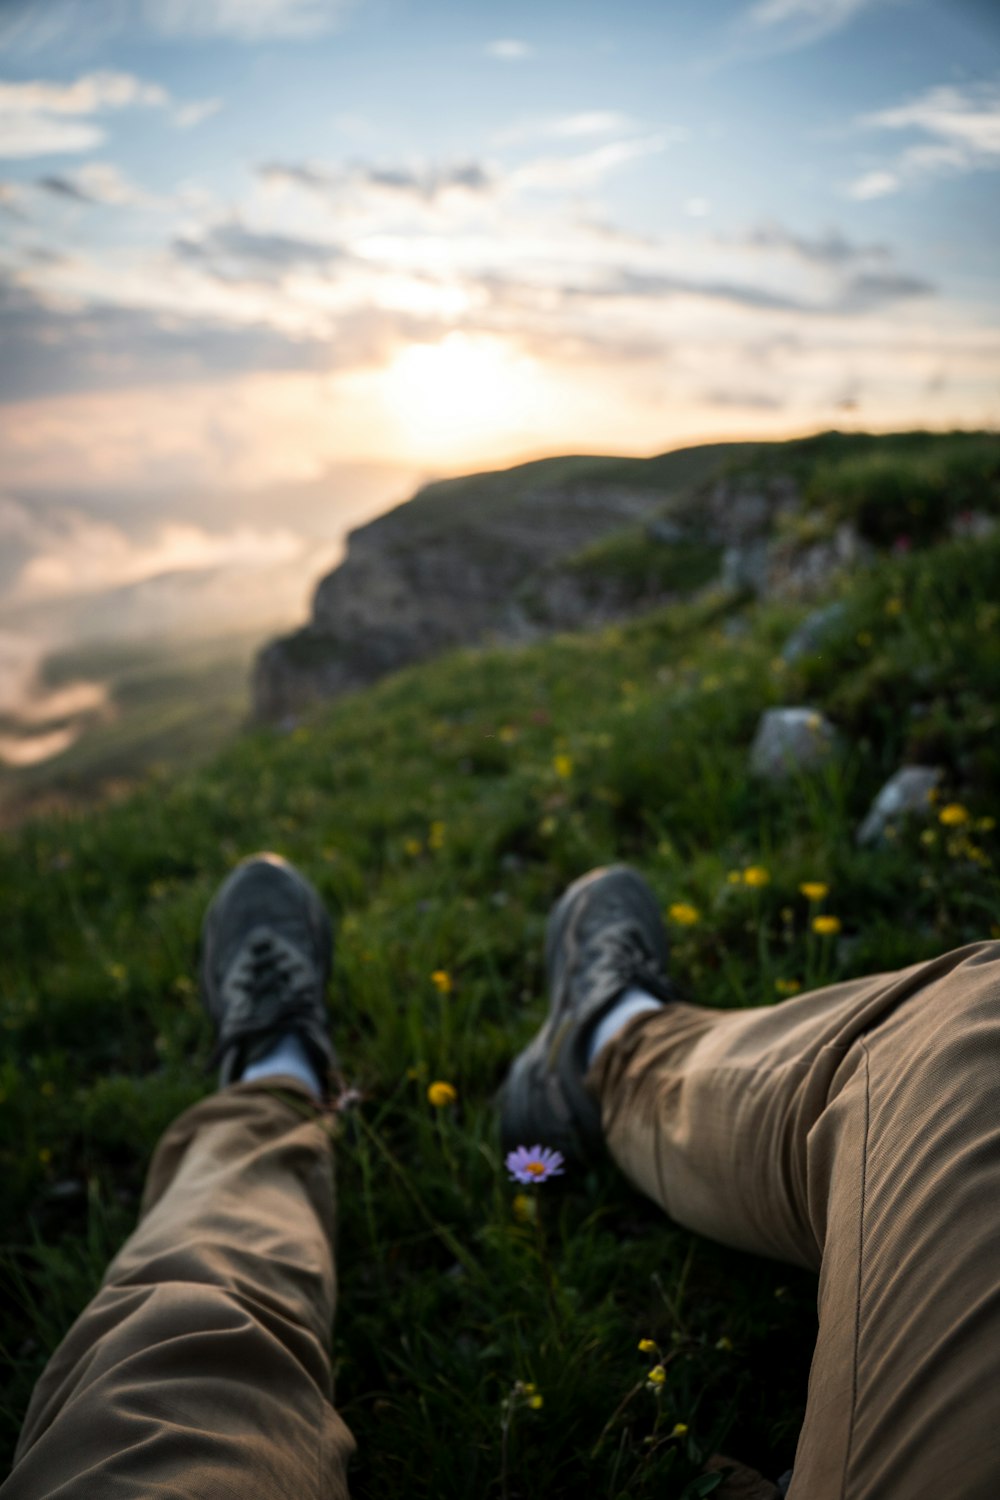 a person's feet in a grassy field with a mountain in the background